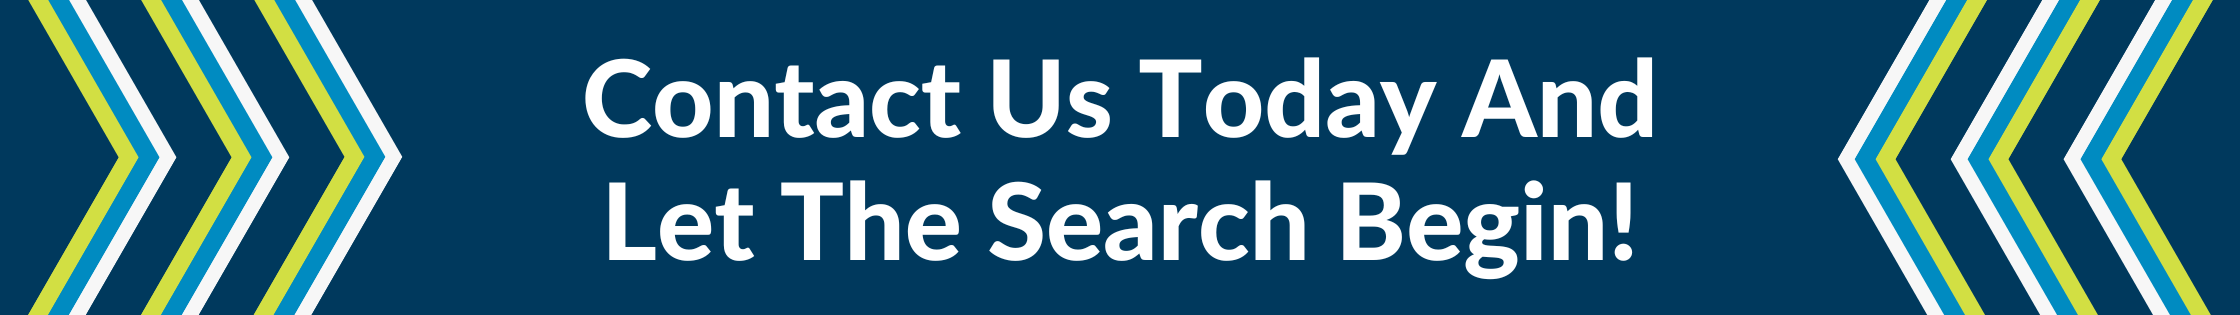 Contact Us Today And Let The Search Begin!